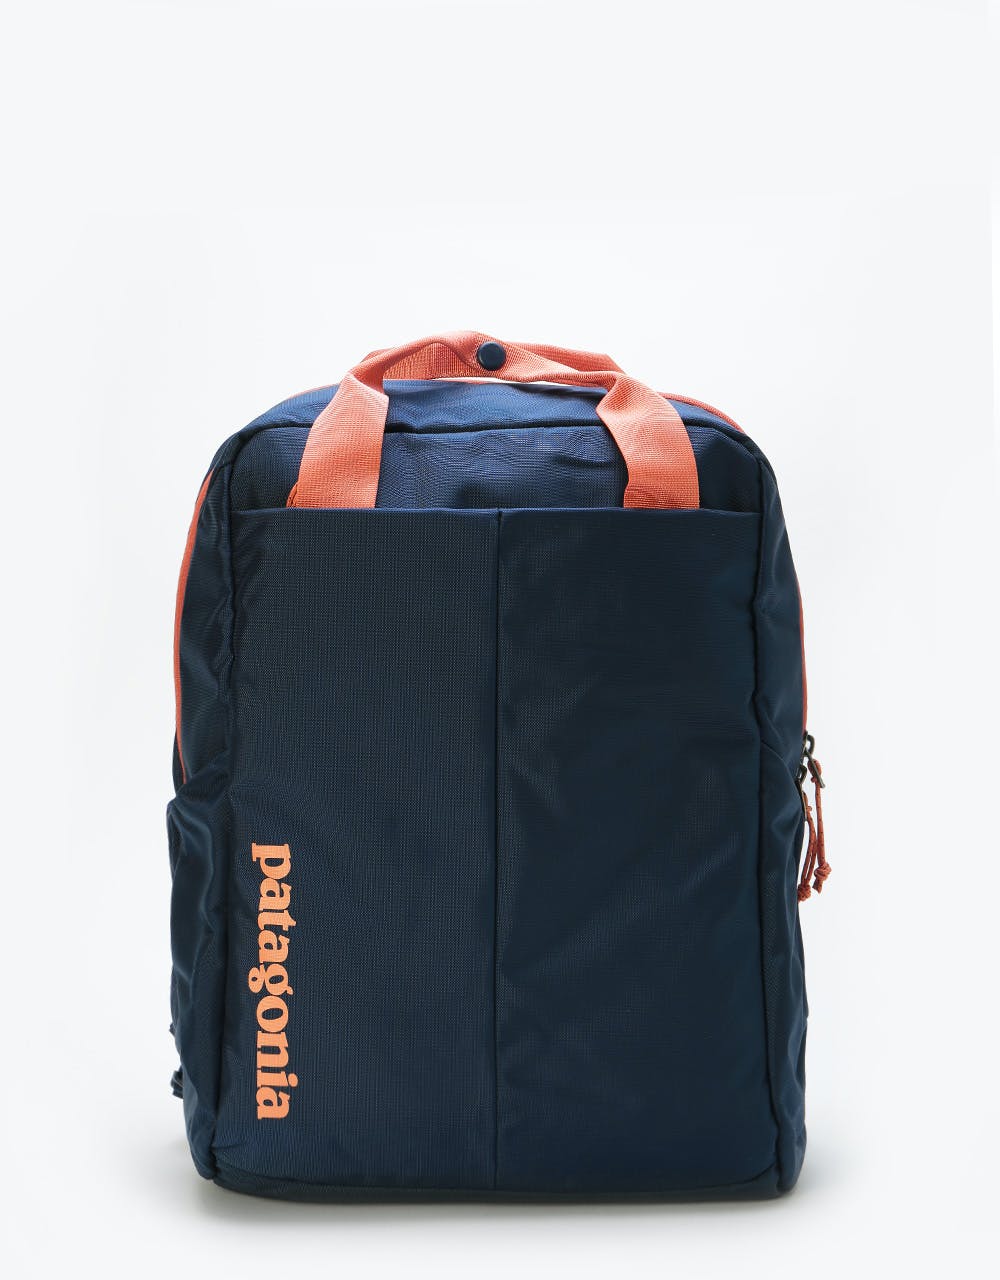 Patagonia Tamango Pack 20L Backpack - Classic Navy/Mellow Melon